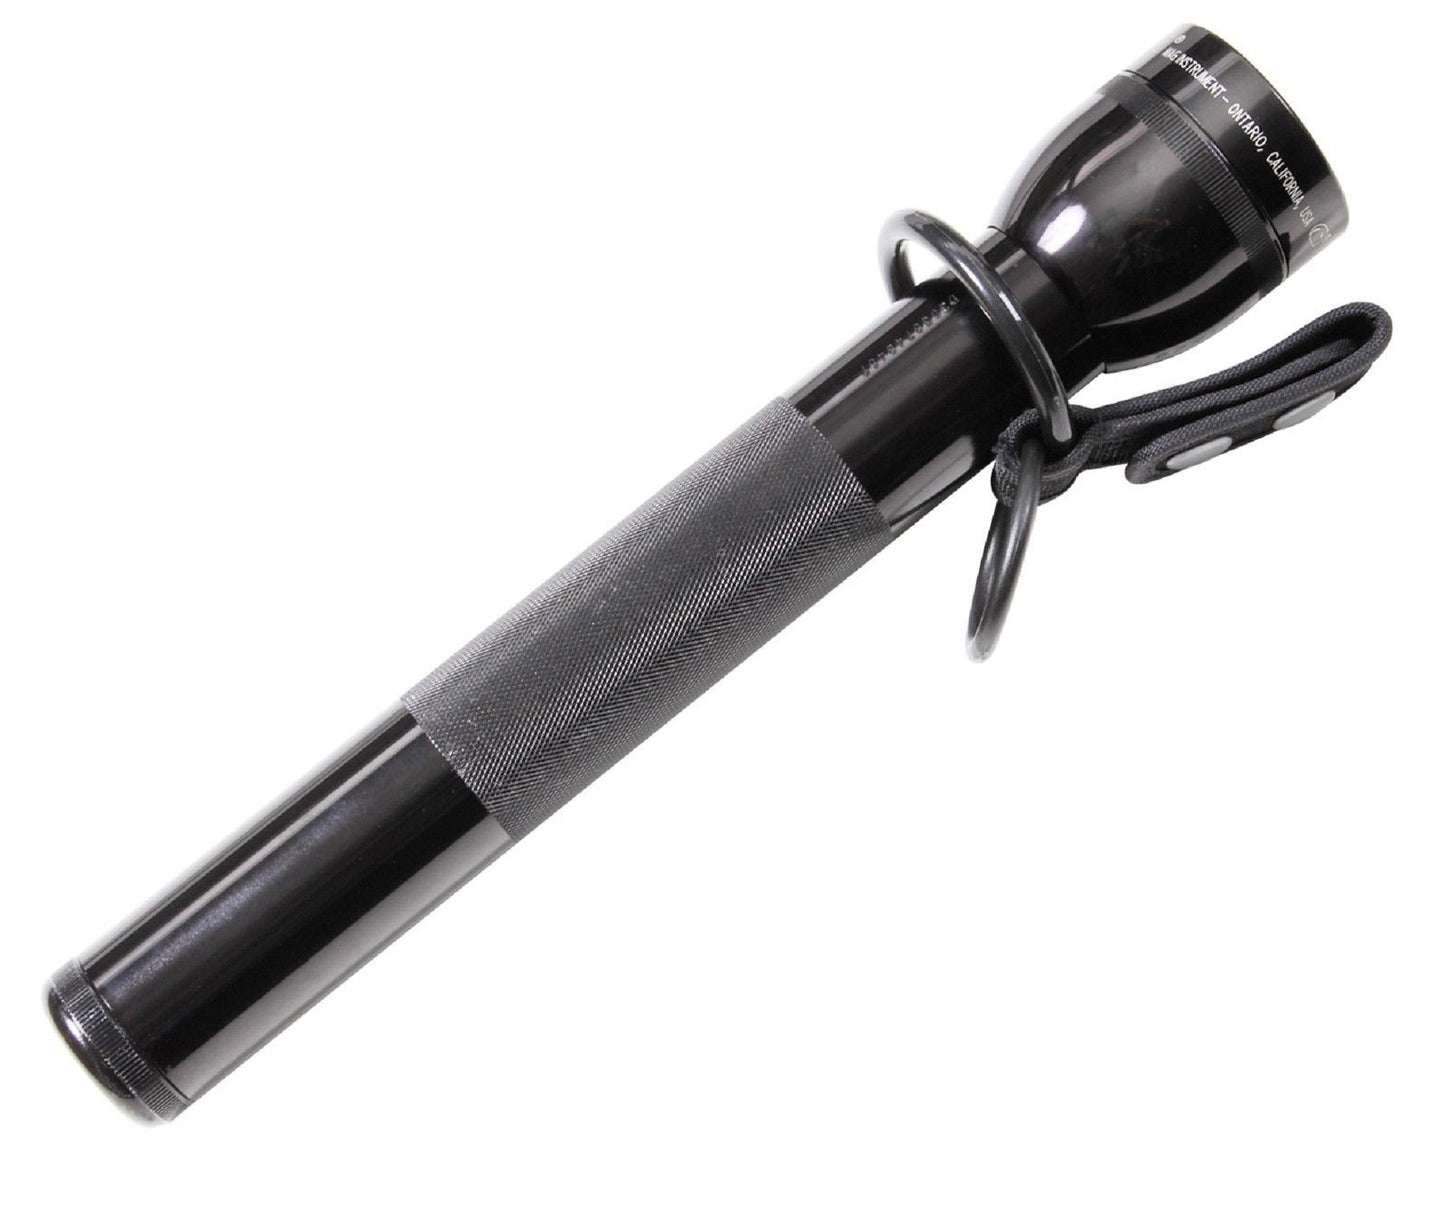 Rothco Black Double Ring Flashlight or Stick Holder